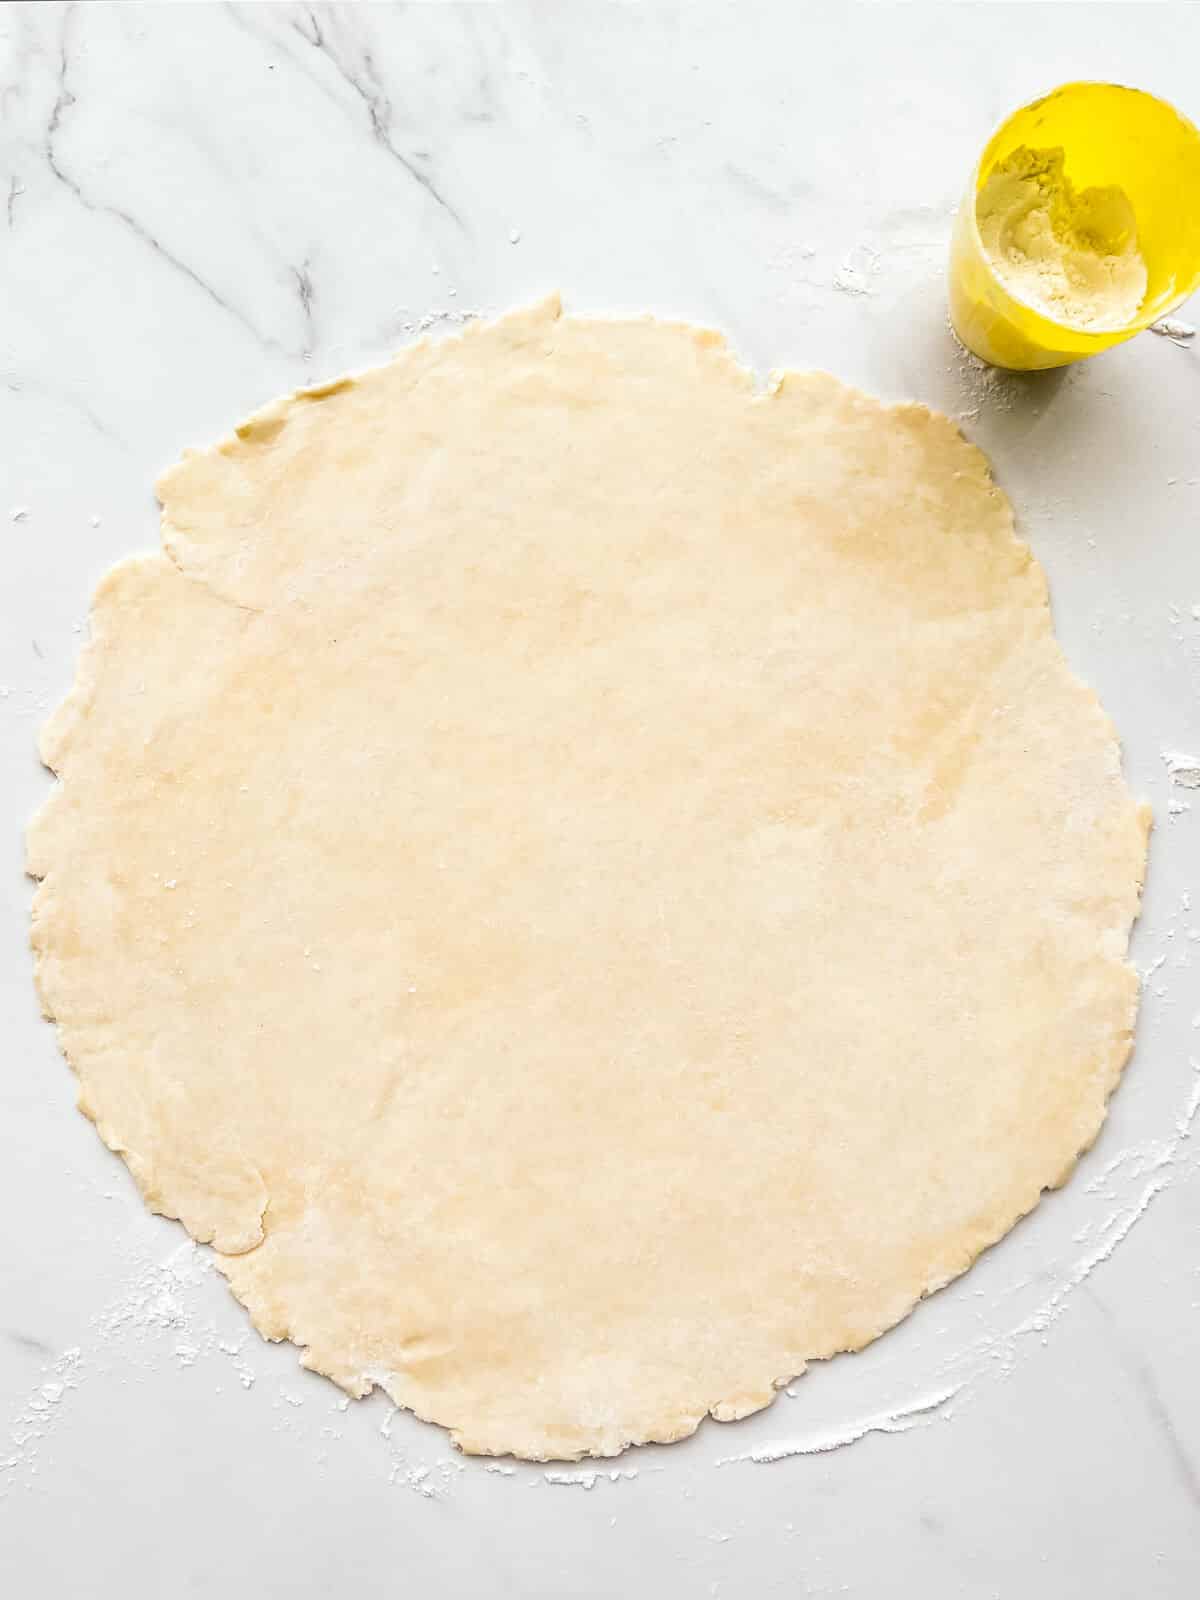 Pie dough rolled out into a round, thin sheet to make a pie crust.